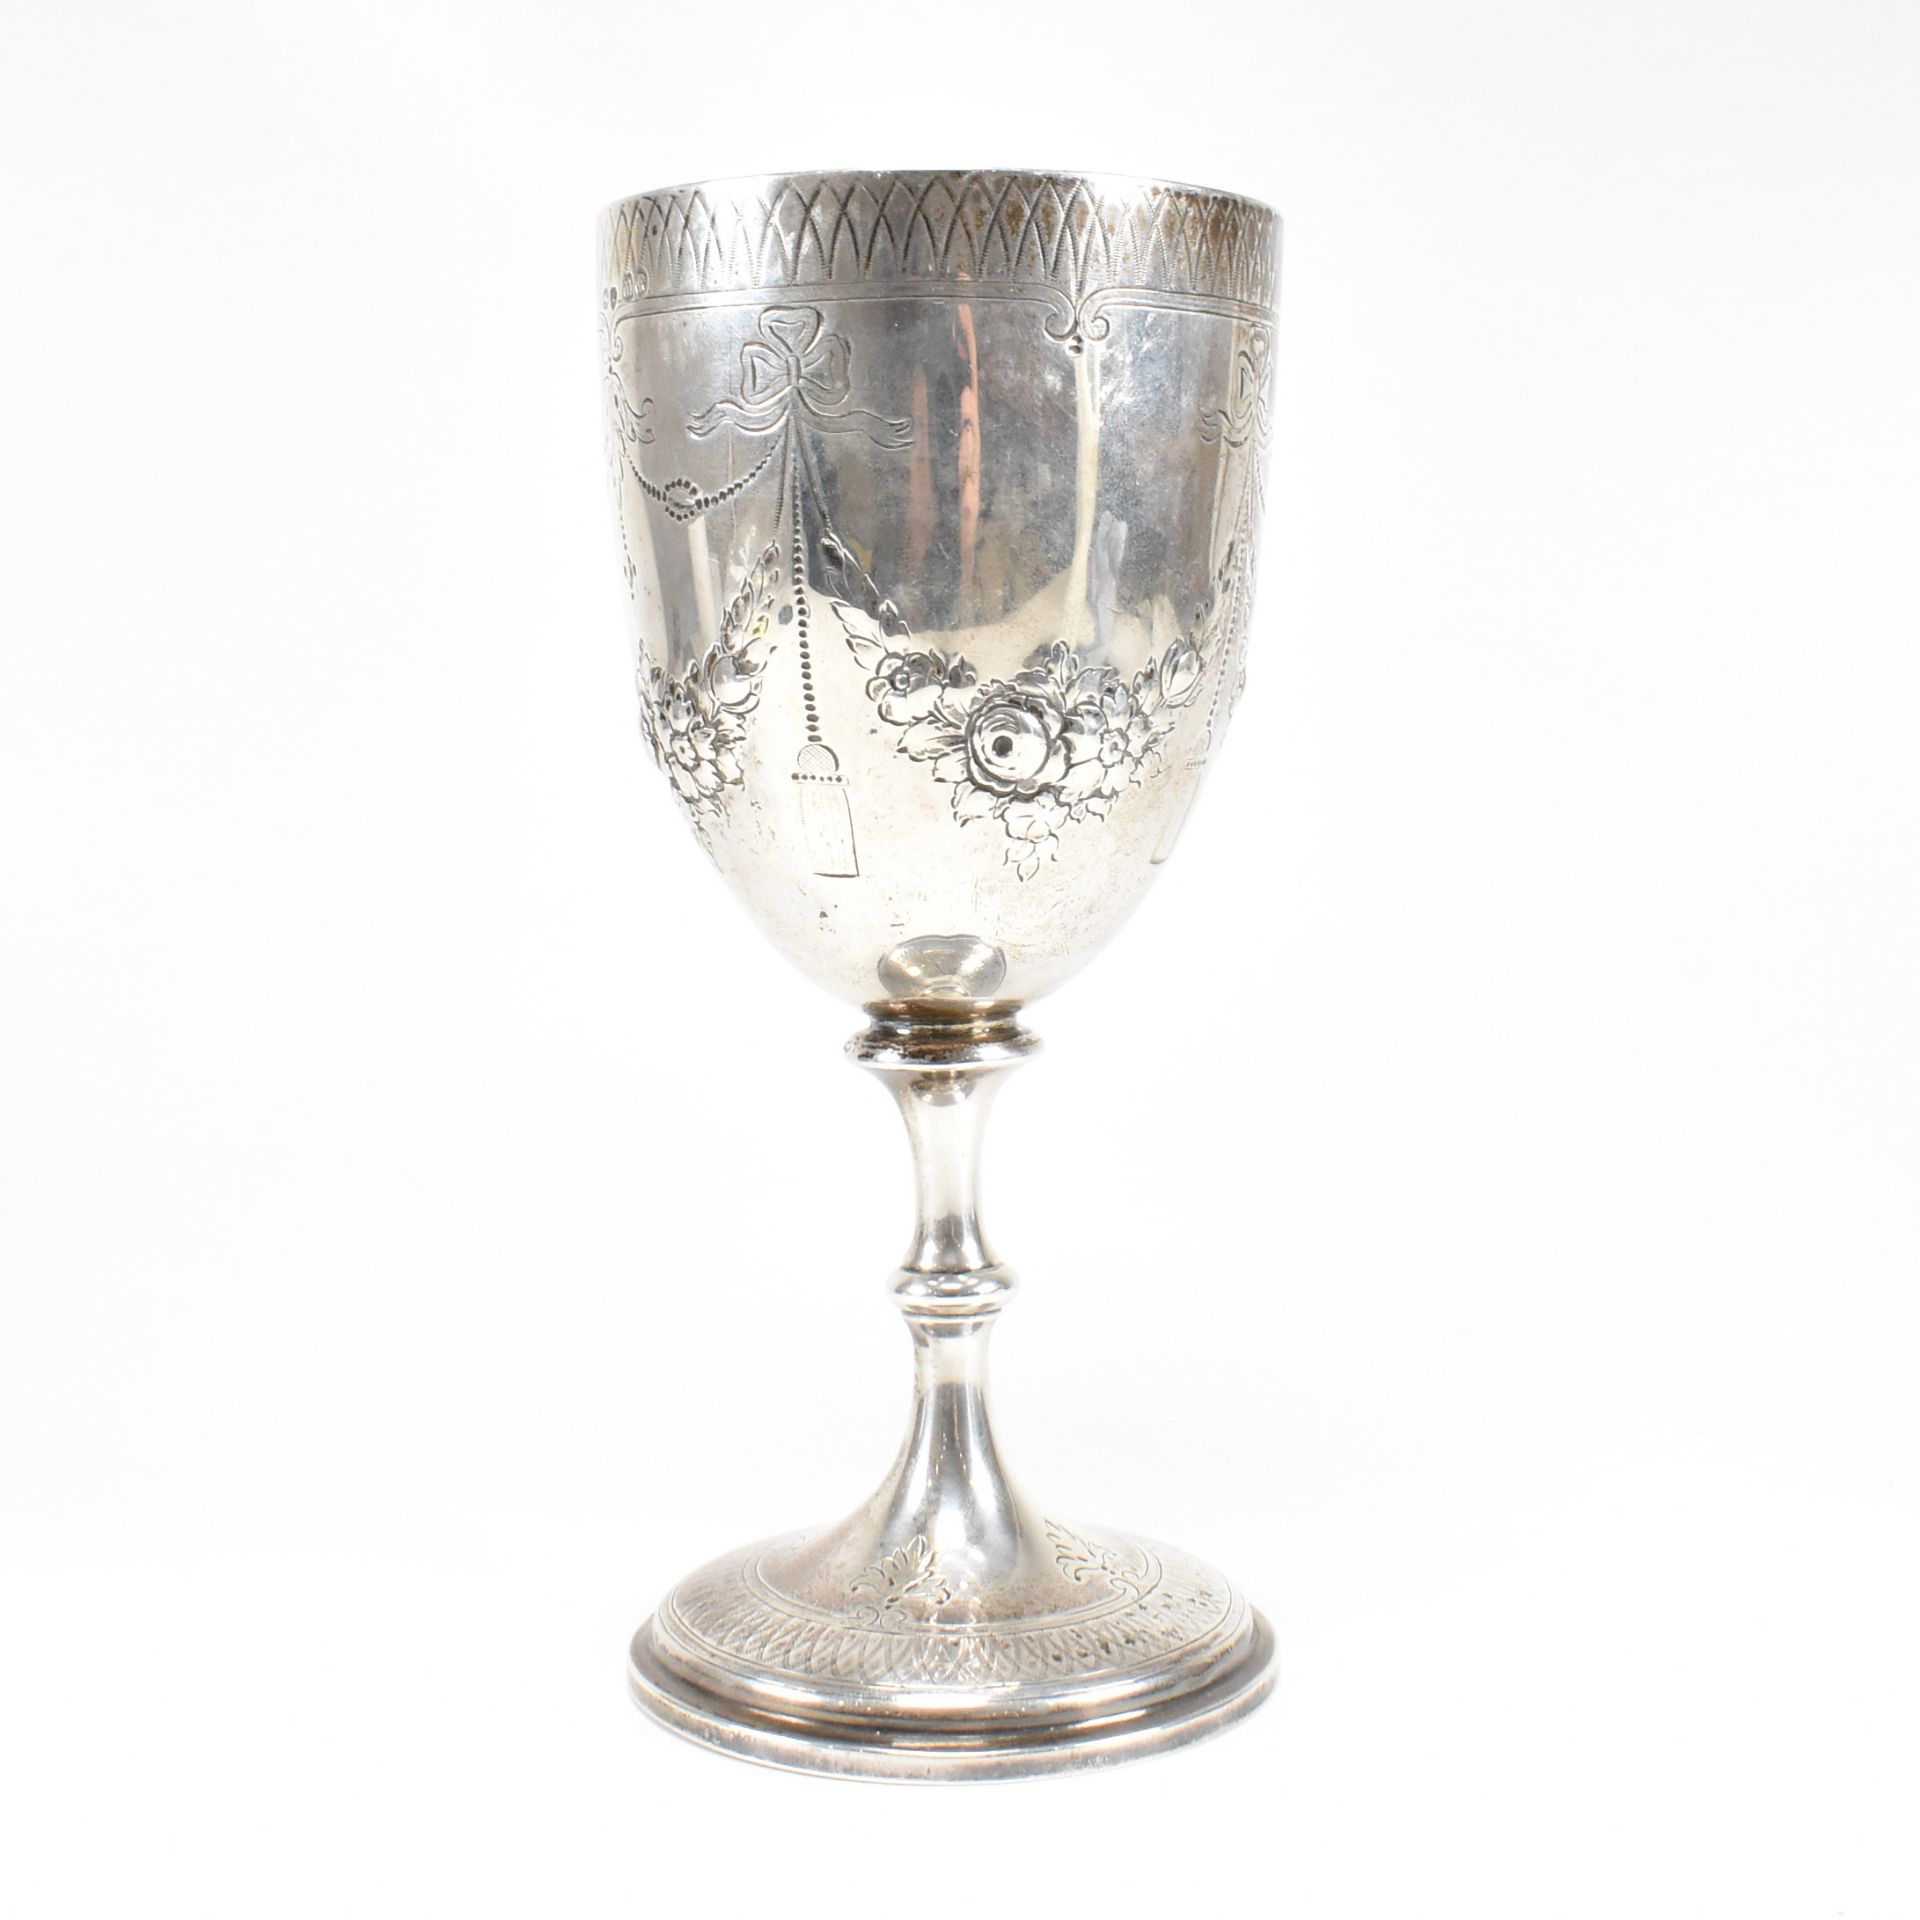 VICTORIAN HALLMARKED SILVER GOBLET TROPHY - Image 3 of 10